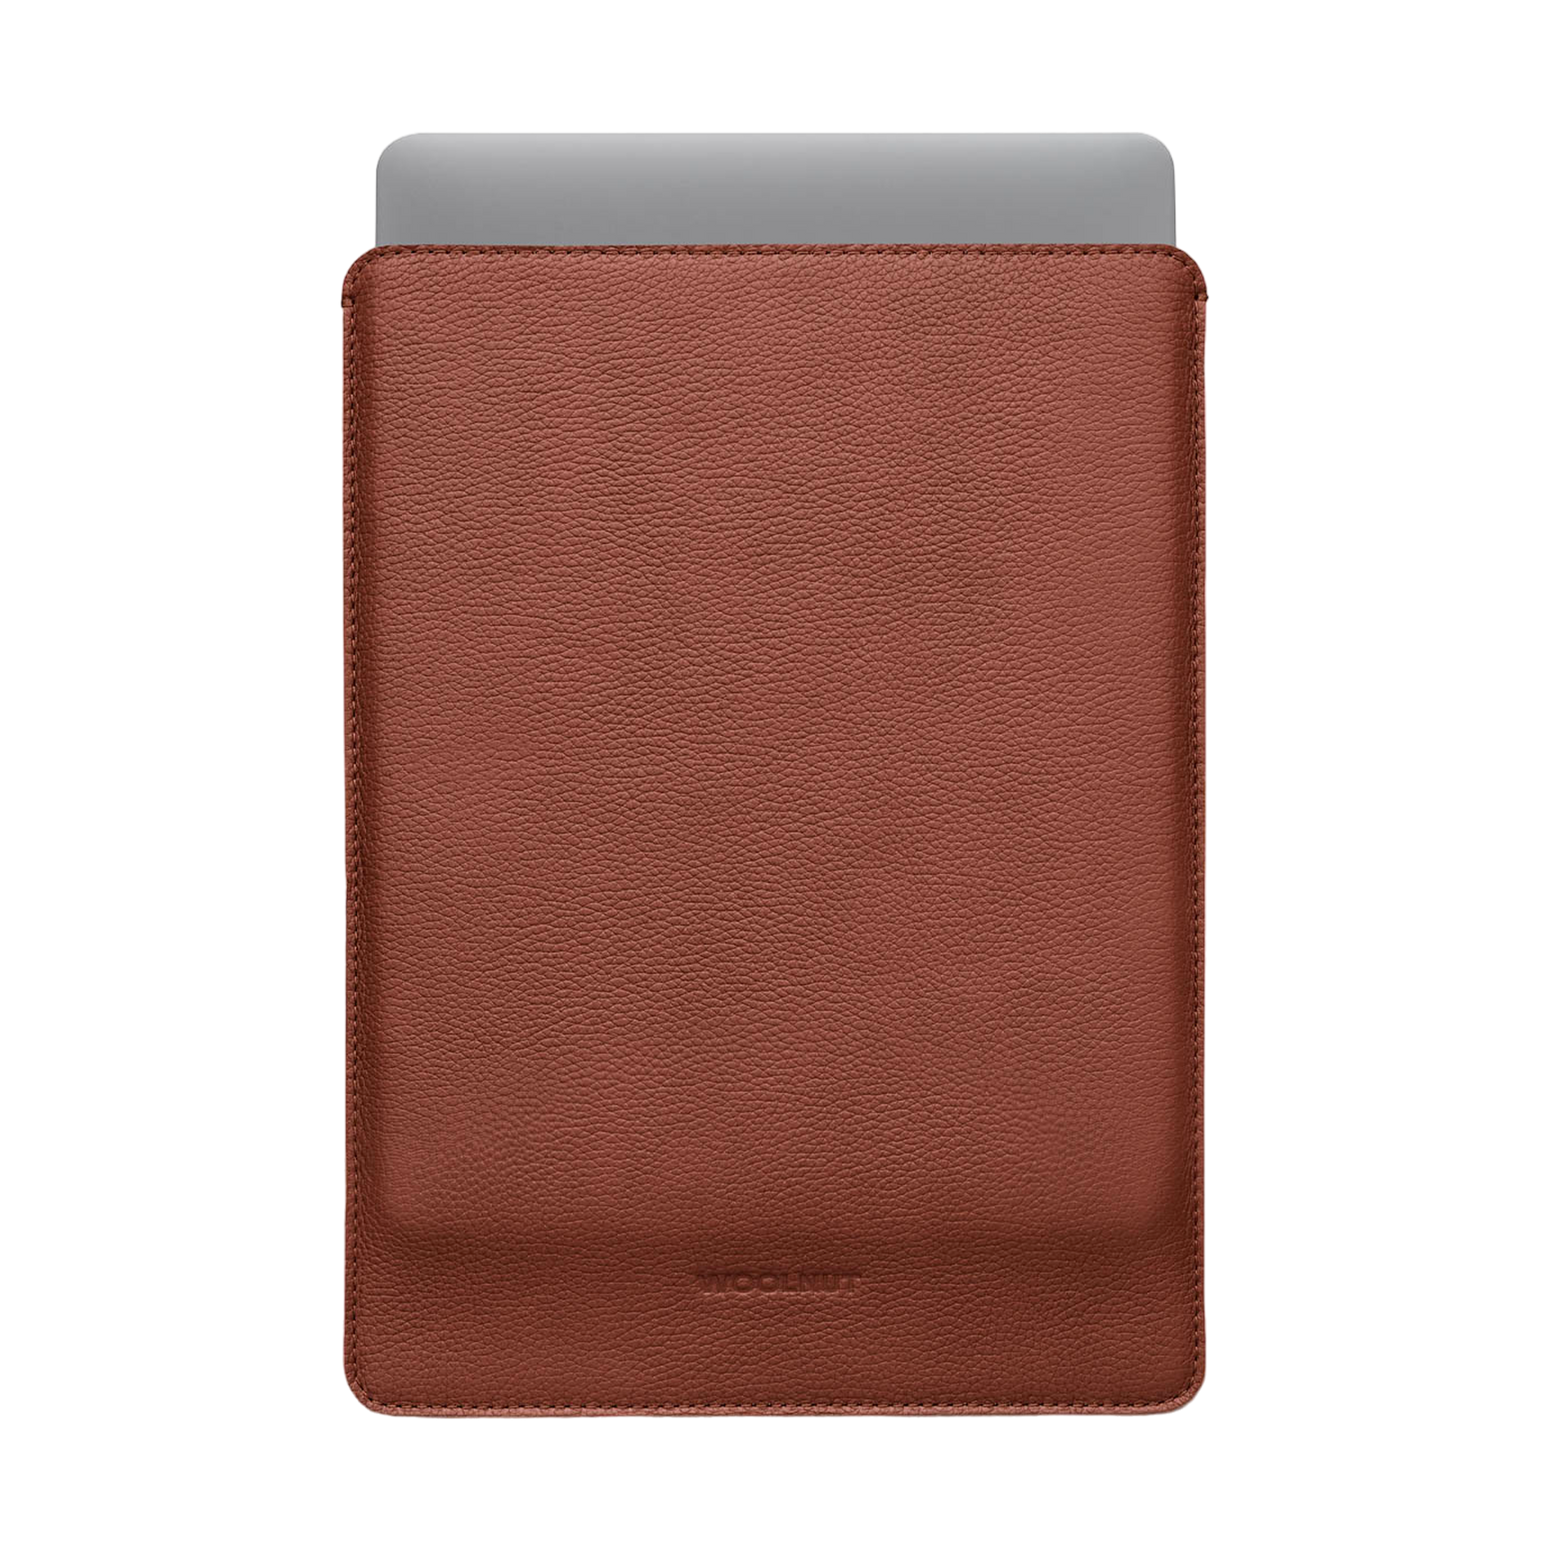 WOOLNUT Leather Sleeve for 14-inch MacBook Pro - Cognac